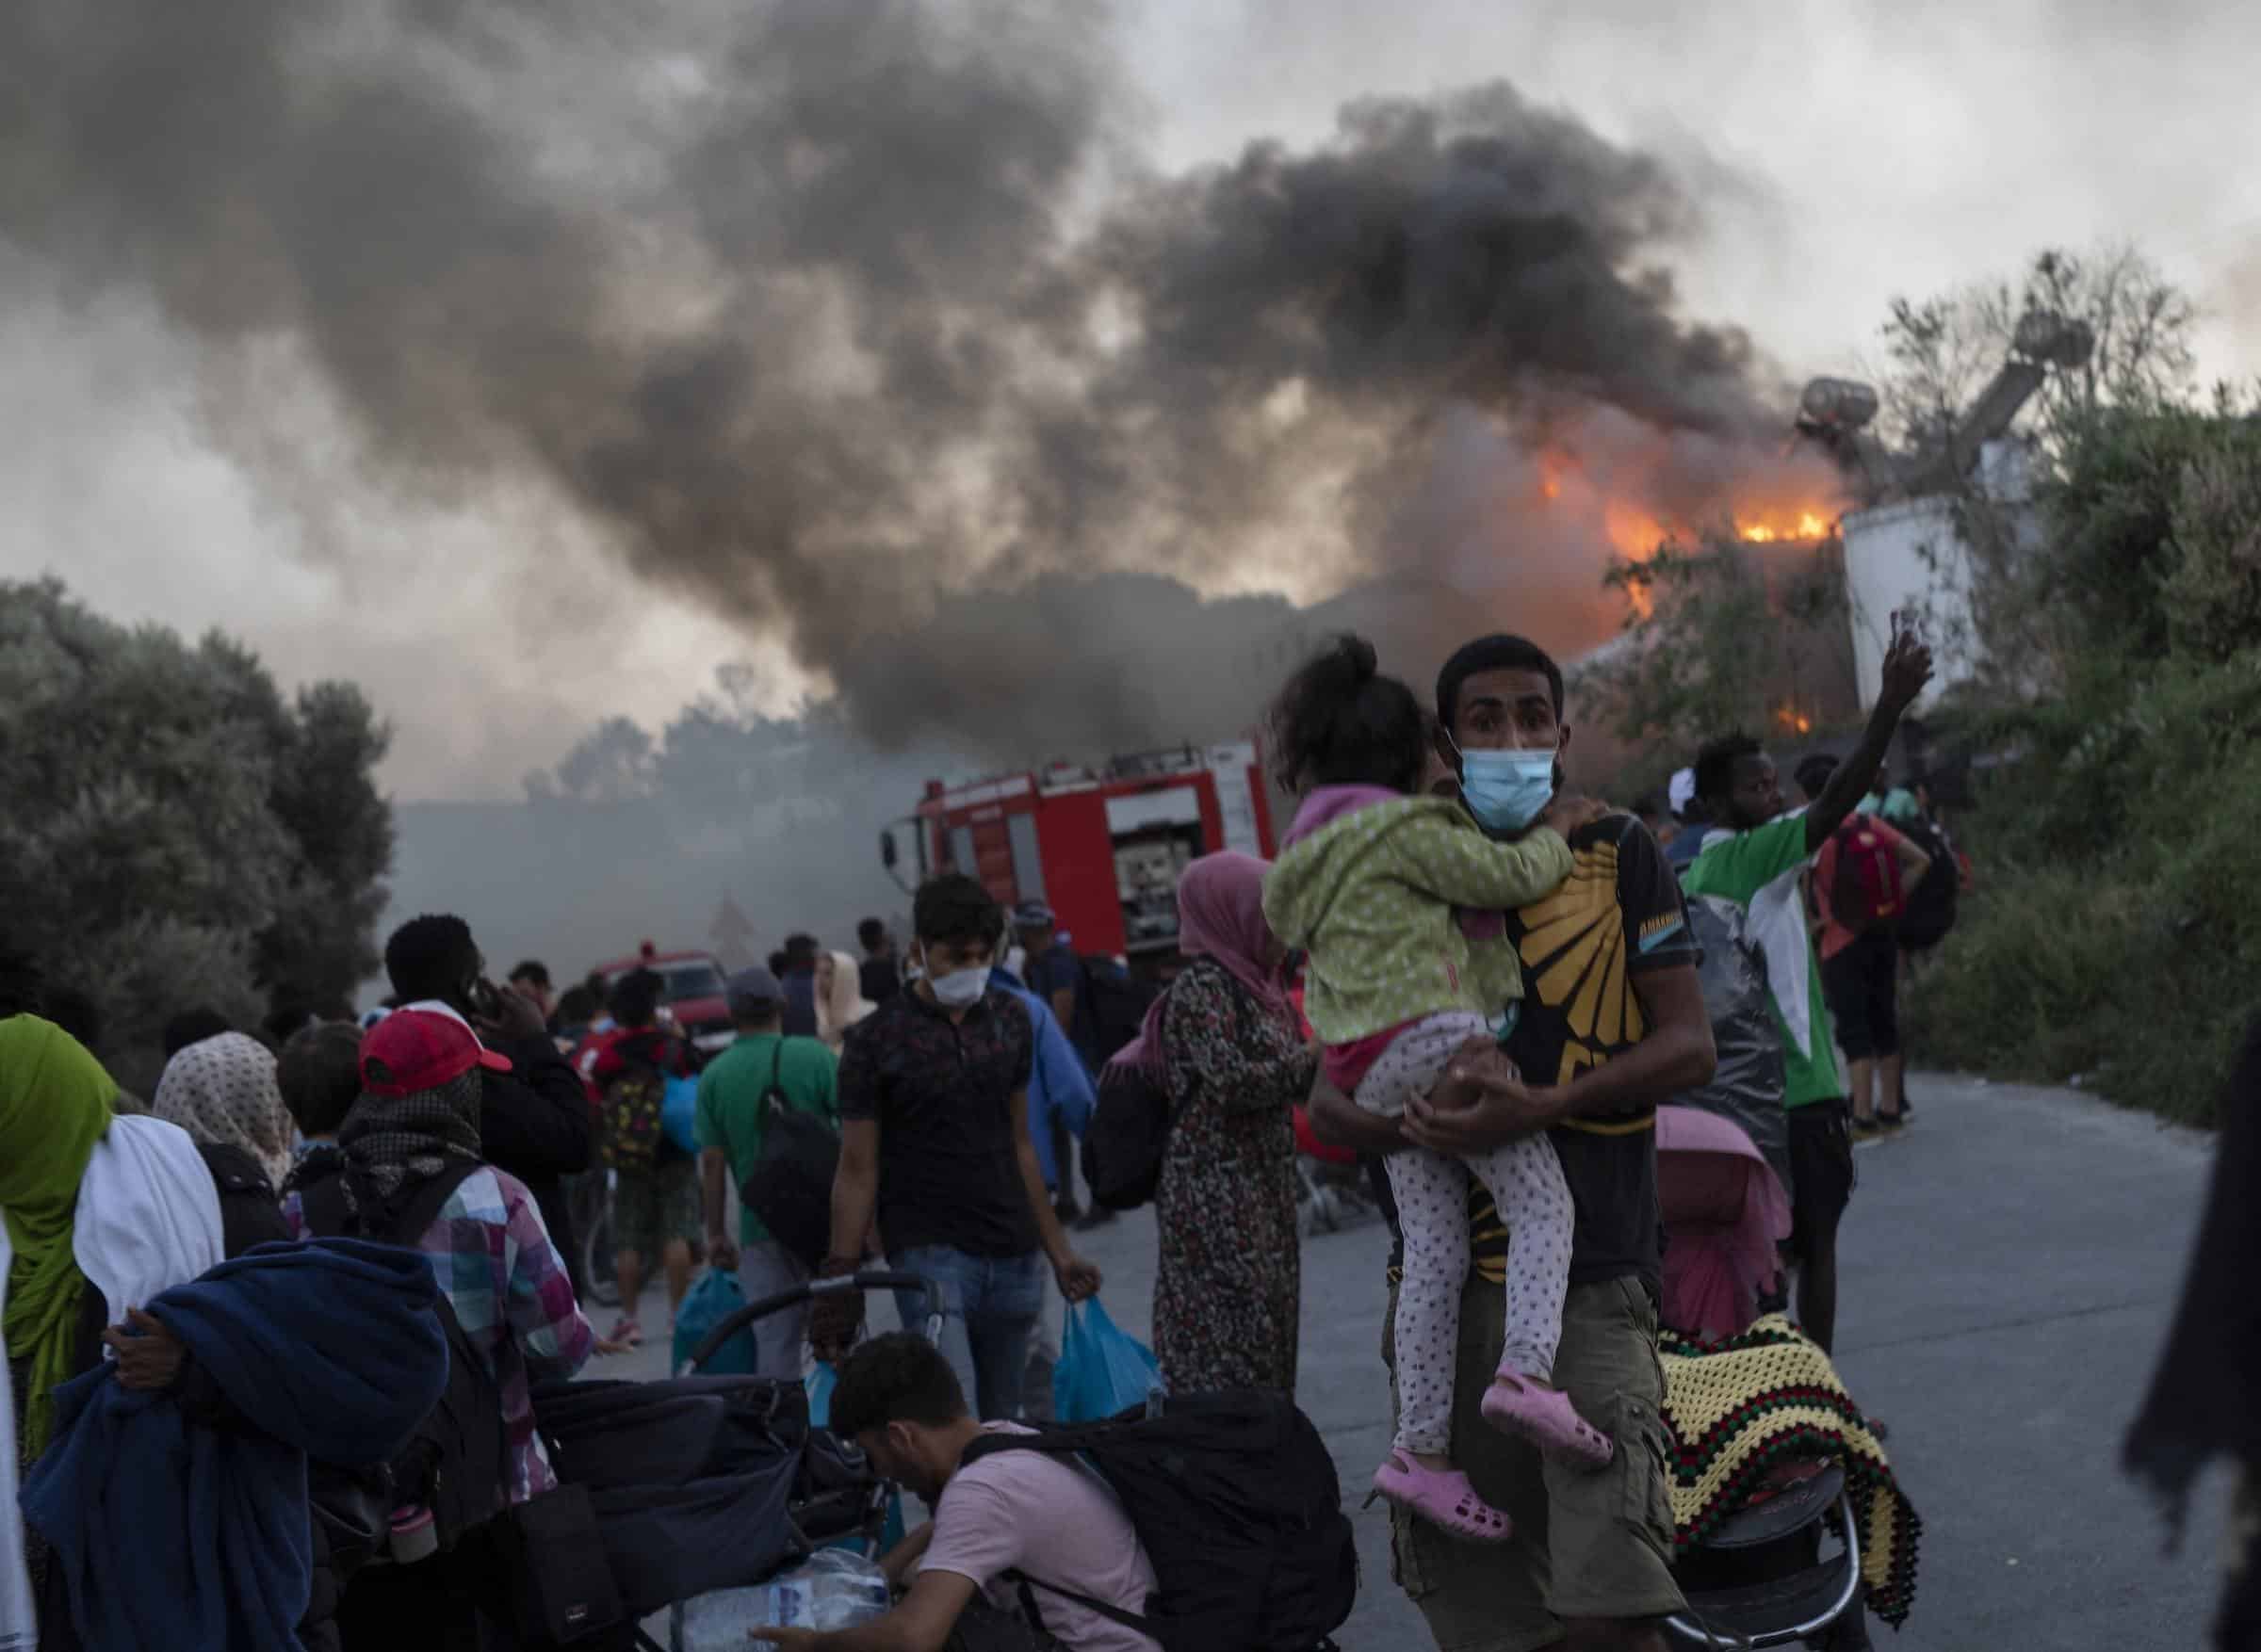 Second fire destroys ‘dire’ Greece migrant camp increasing pressure on other nations to assist